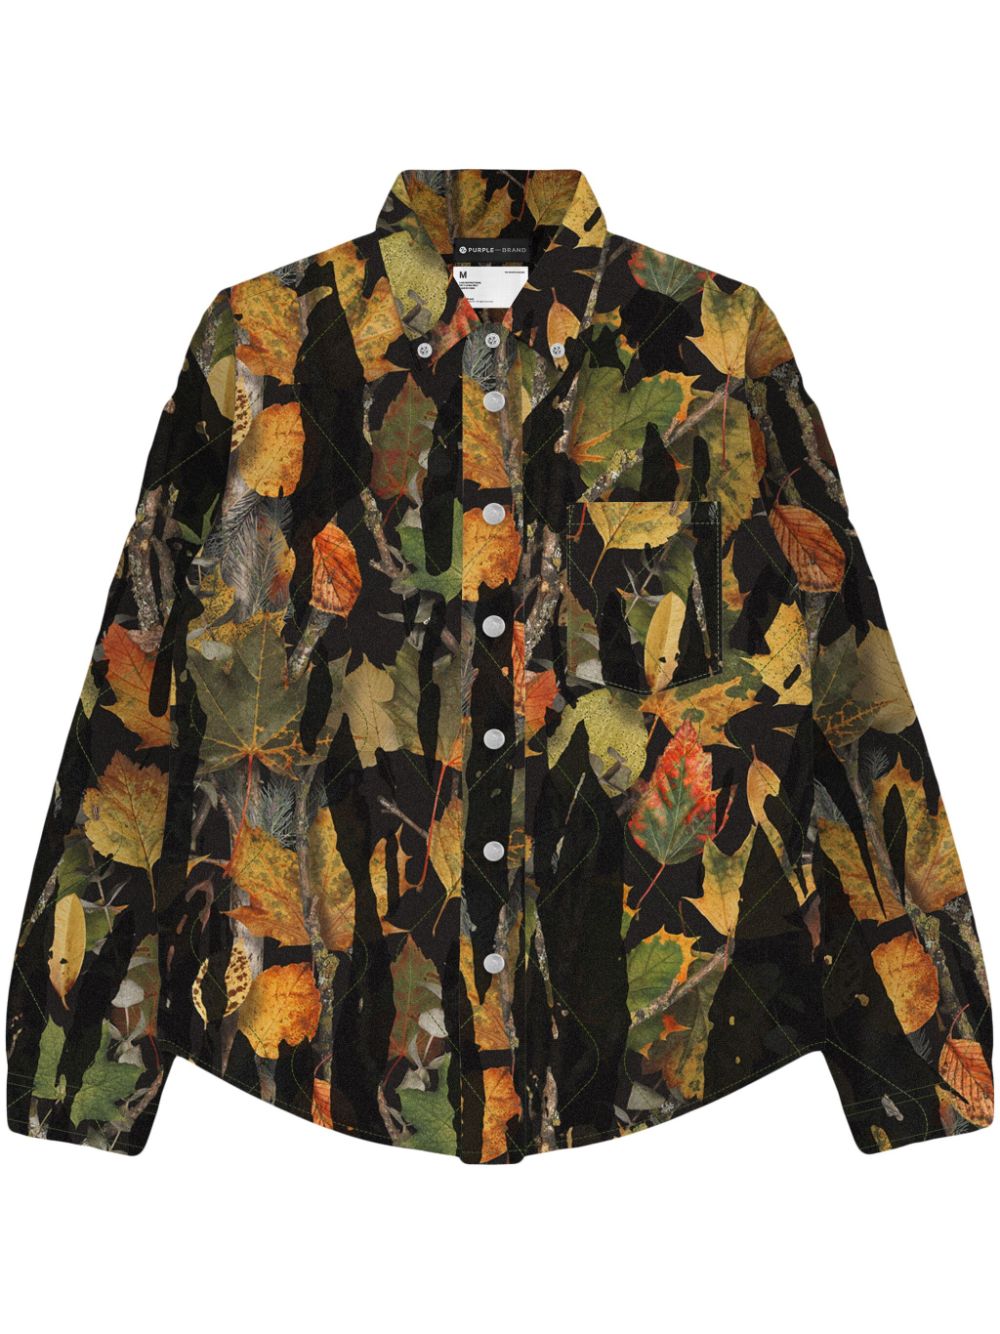 P313 Drip Camo quilted shirt jacket